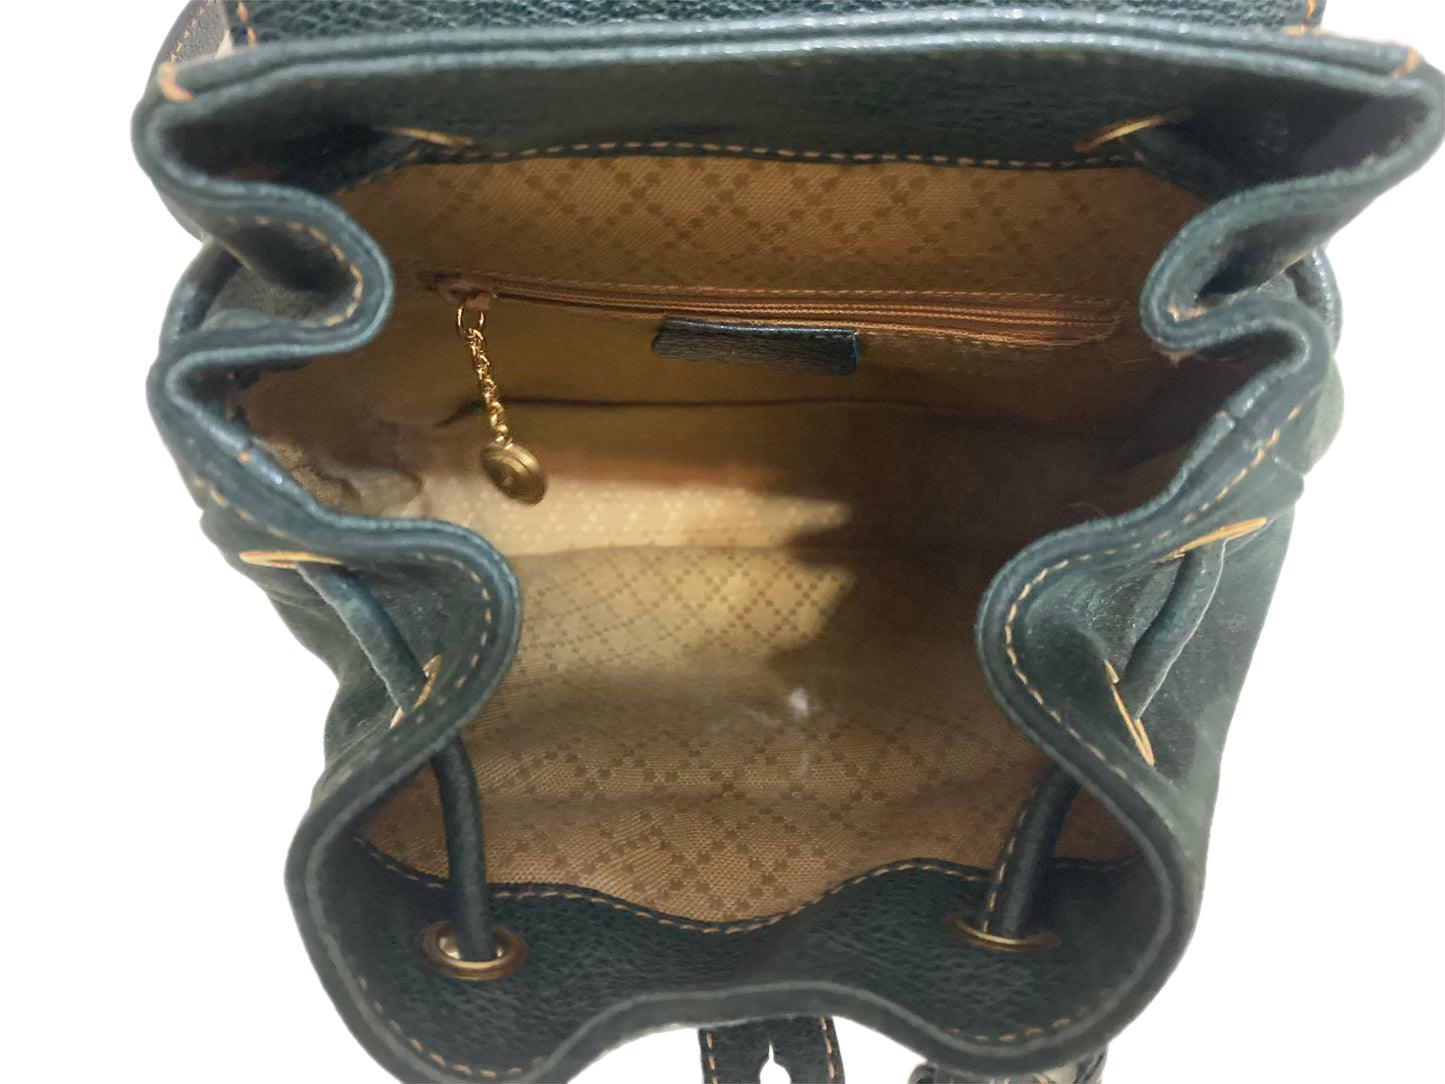 GUCCI Suede and Leather Bamboo Handle Backpack Green